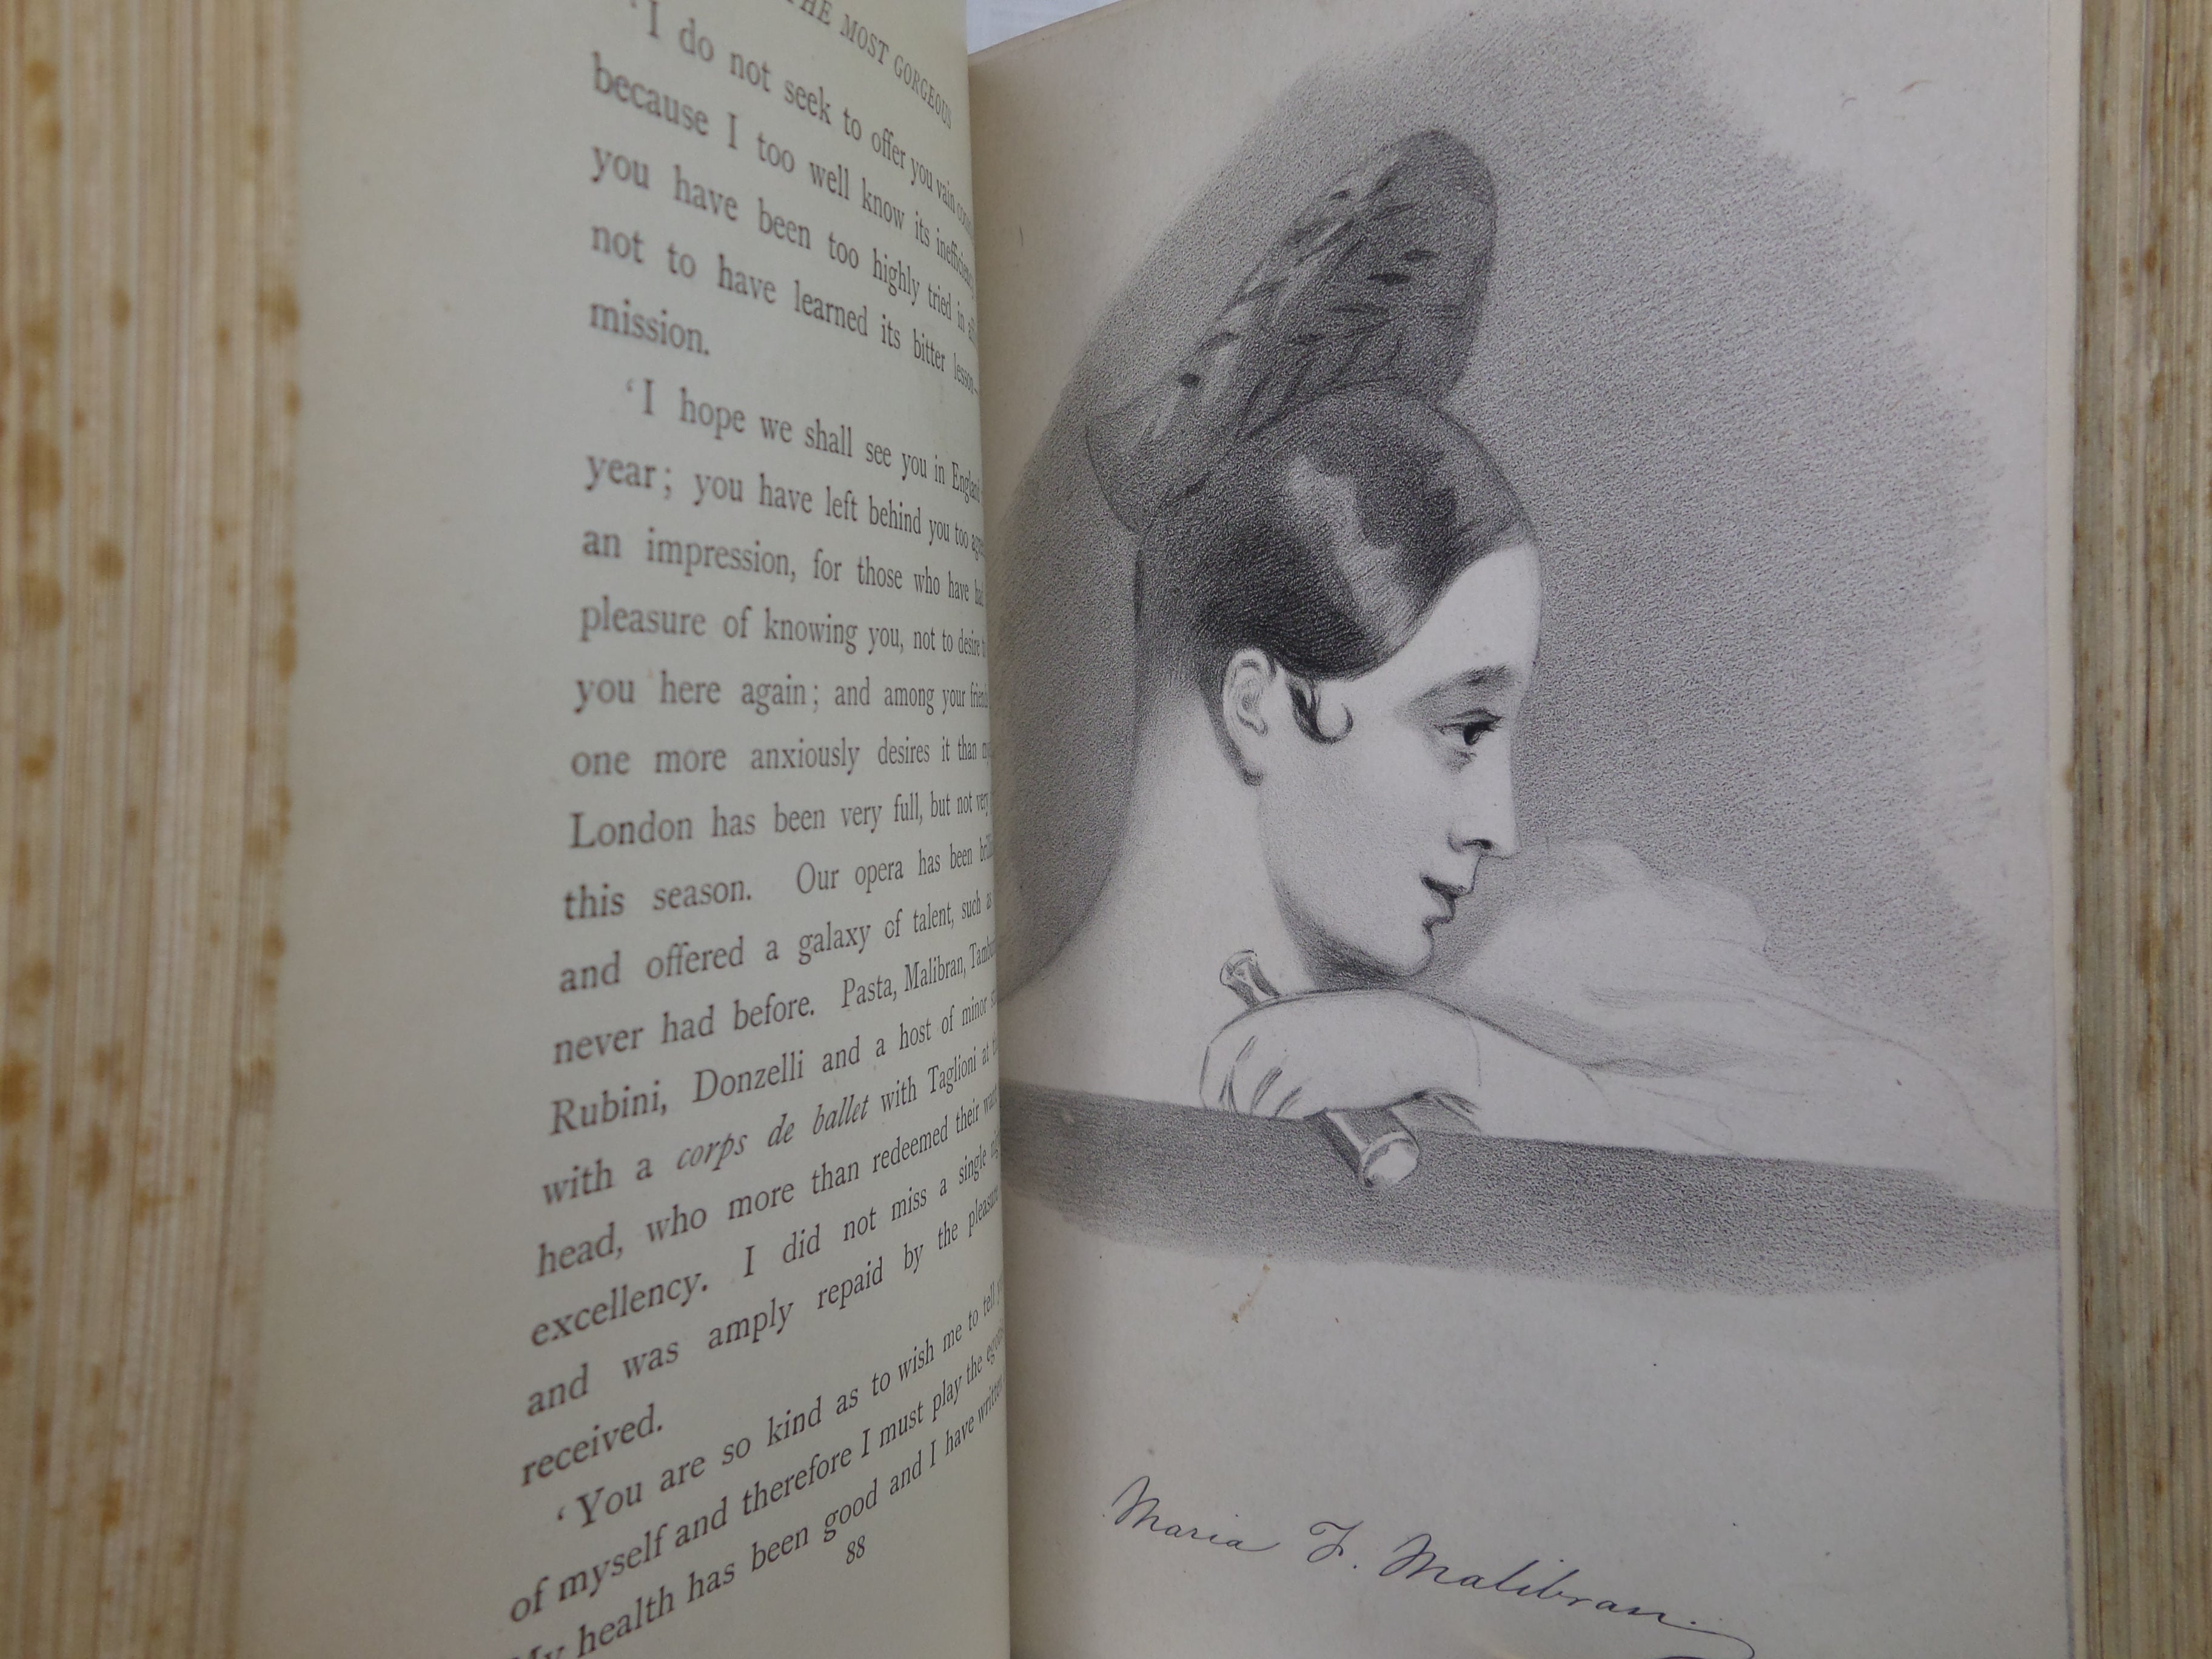 THE MOST GORGEOUS LADY BLESSINGTON 1896 SECOND EDITION EXTRA ILLUSTRATED & BOUND BY BAYNTUN